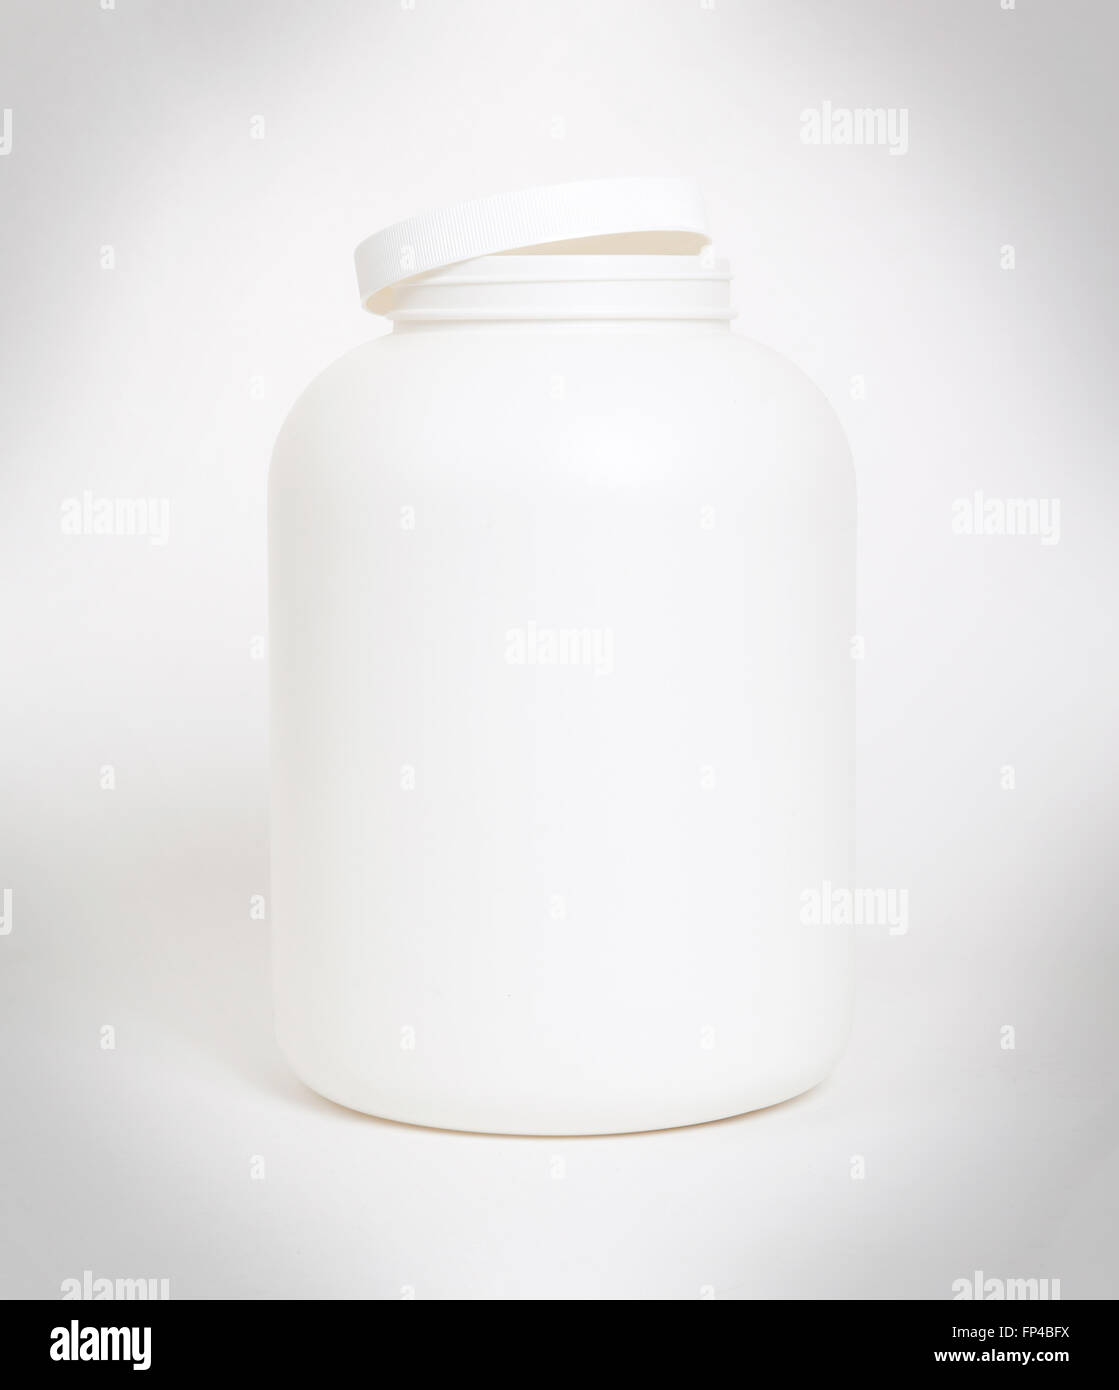 https://c8.alamy.com/comp/FP4BFX/empty-protein-powder-container-isolated-on-white-FP4BFX.jpg